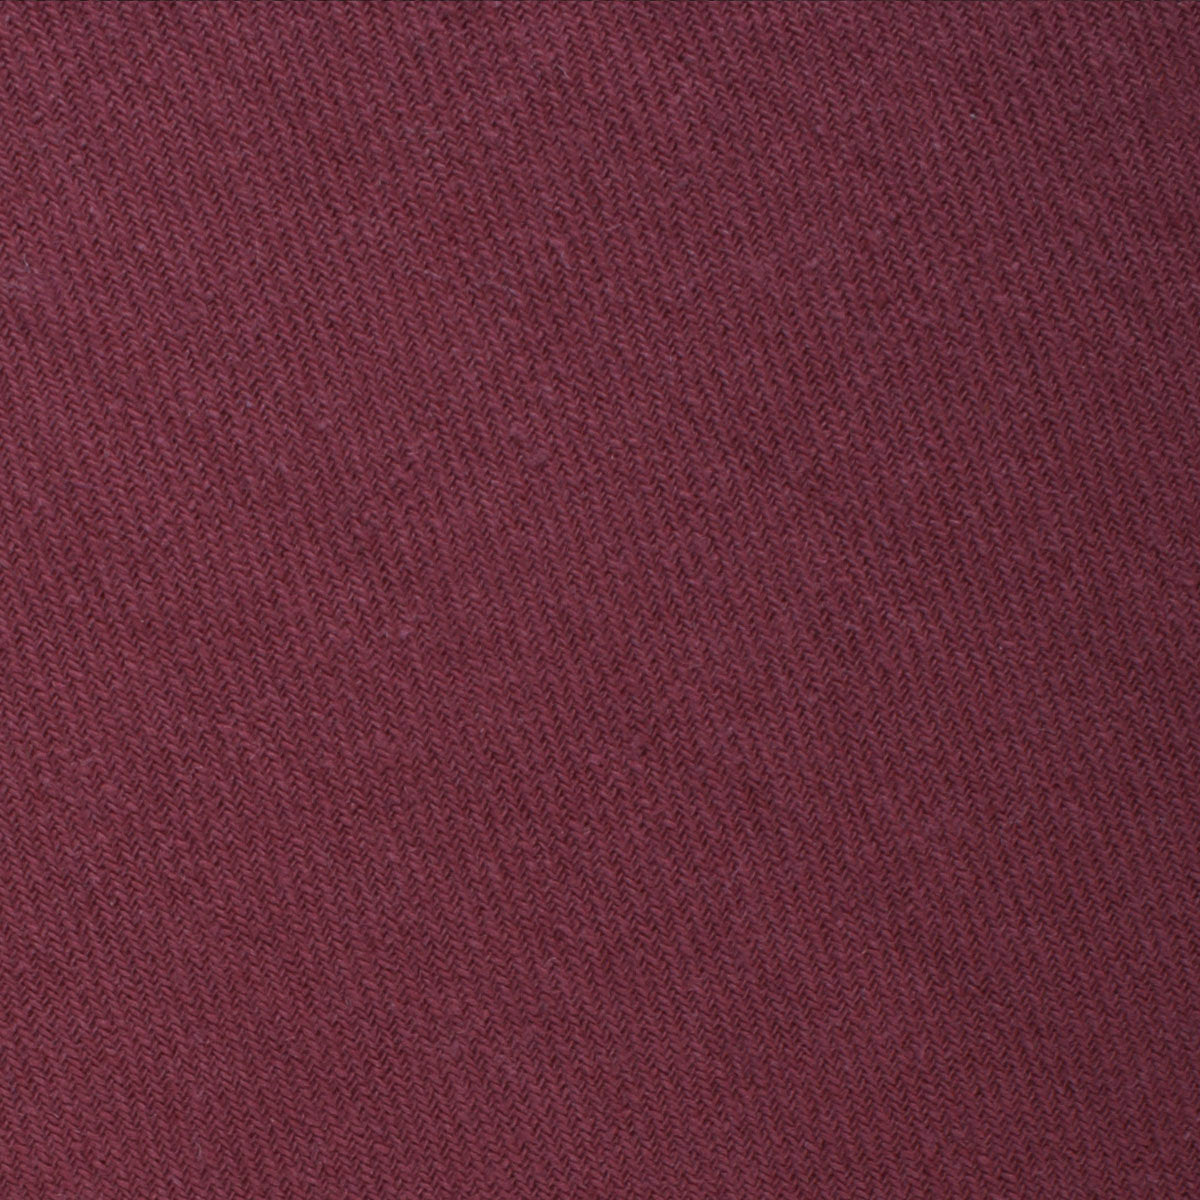 Mulberry Linen Bow Tie Fabric